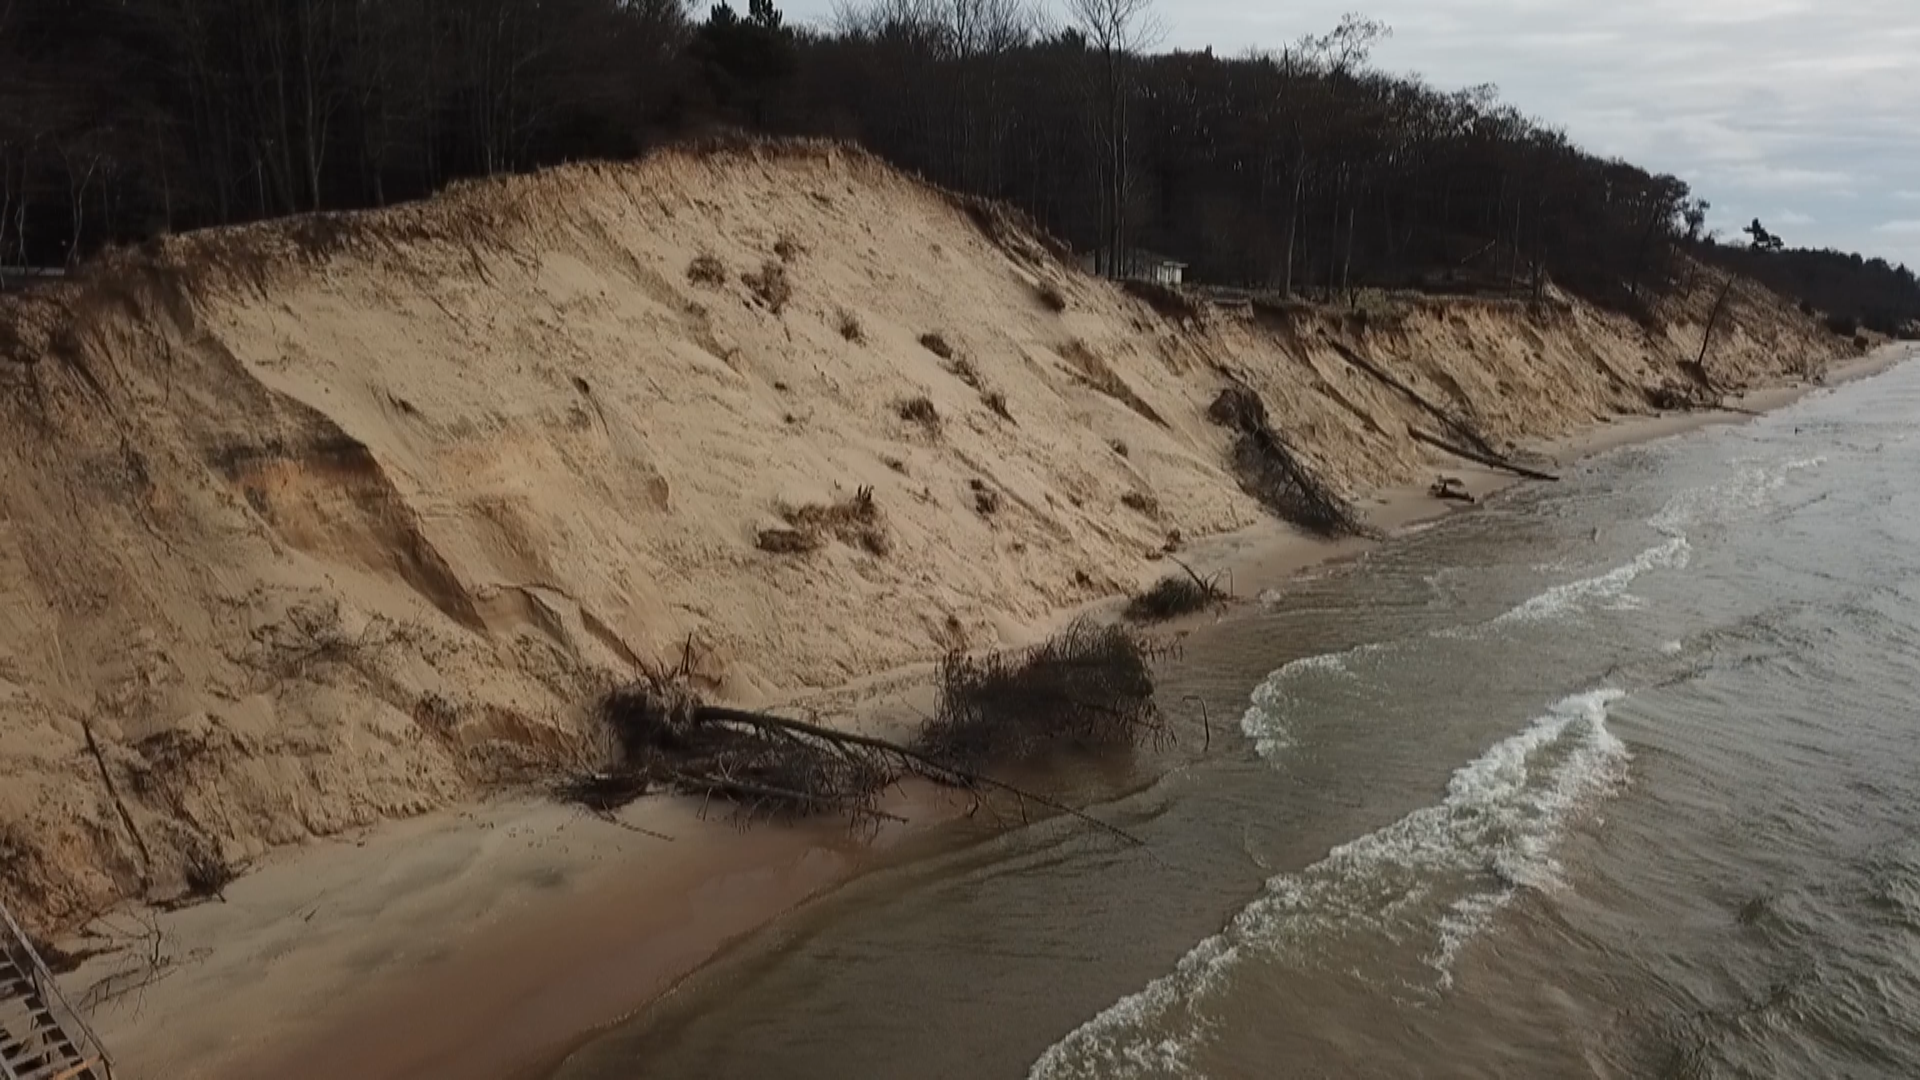 Both U.S. Sen. Debbie Stabenow and U.S. Rep. Fred Upton will get a look at erosion damage along Lake Michigan in South Haven.